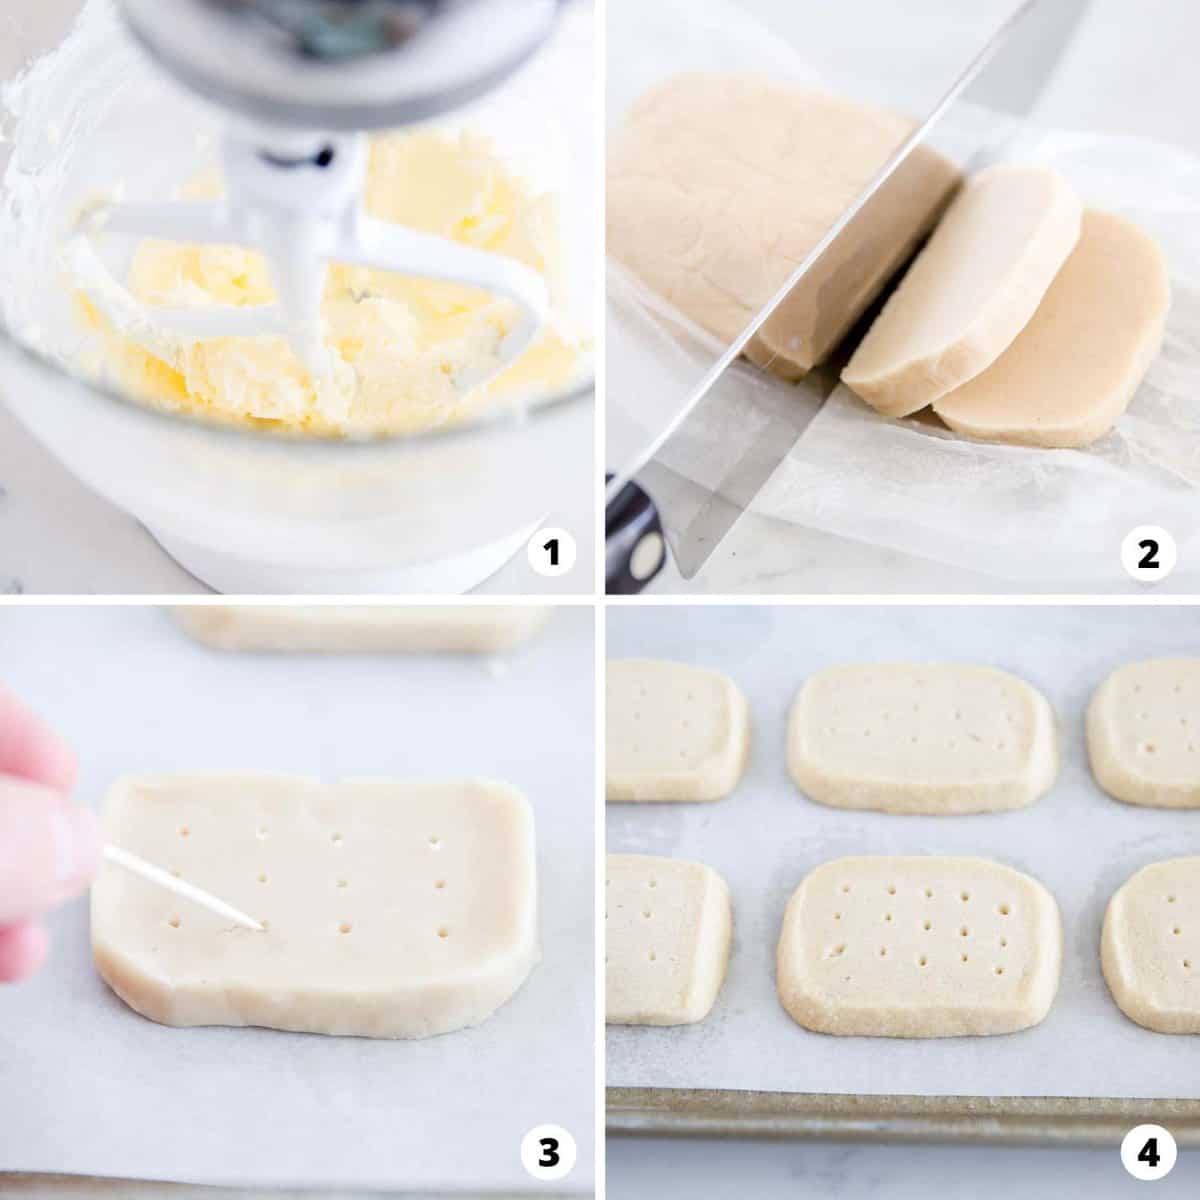 Showing how to make shortbread cookies in a 4 step collage.